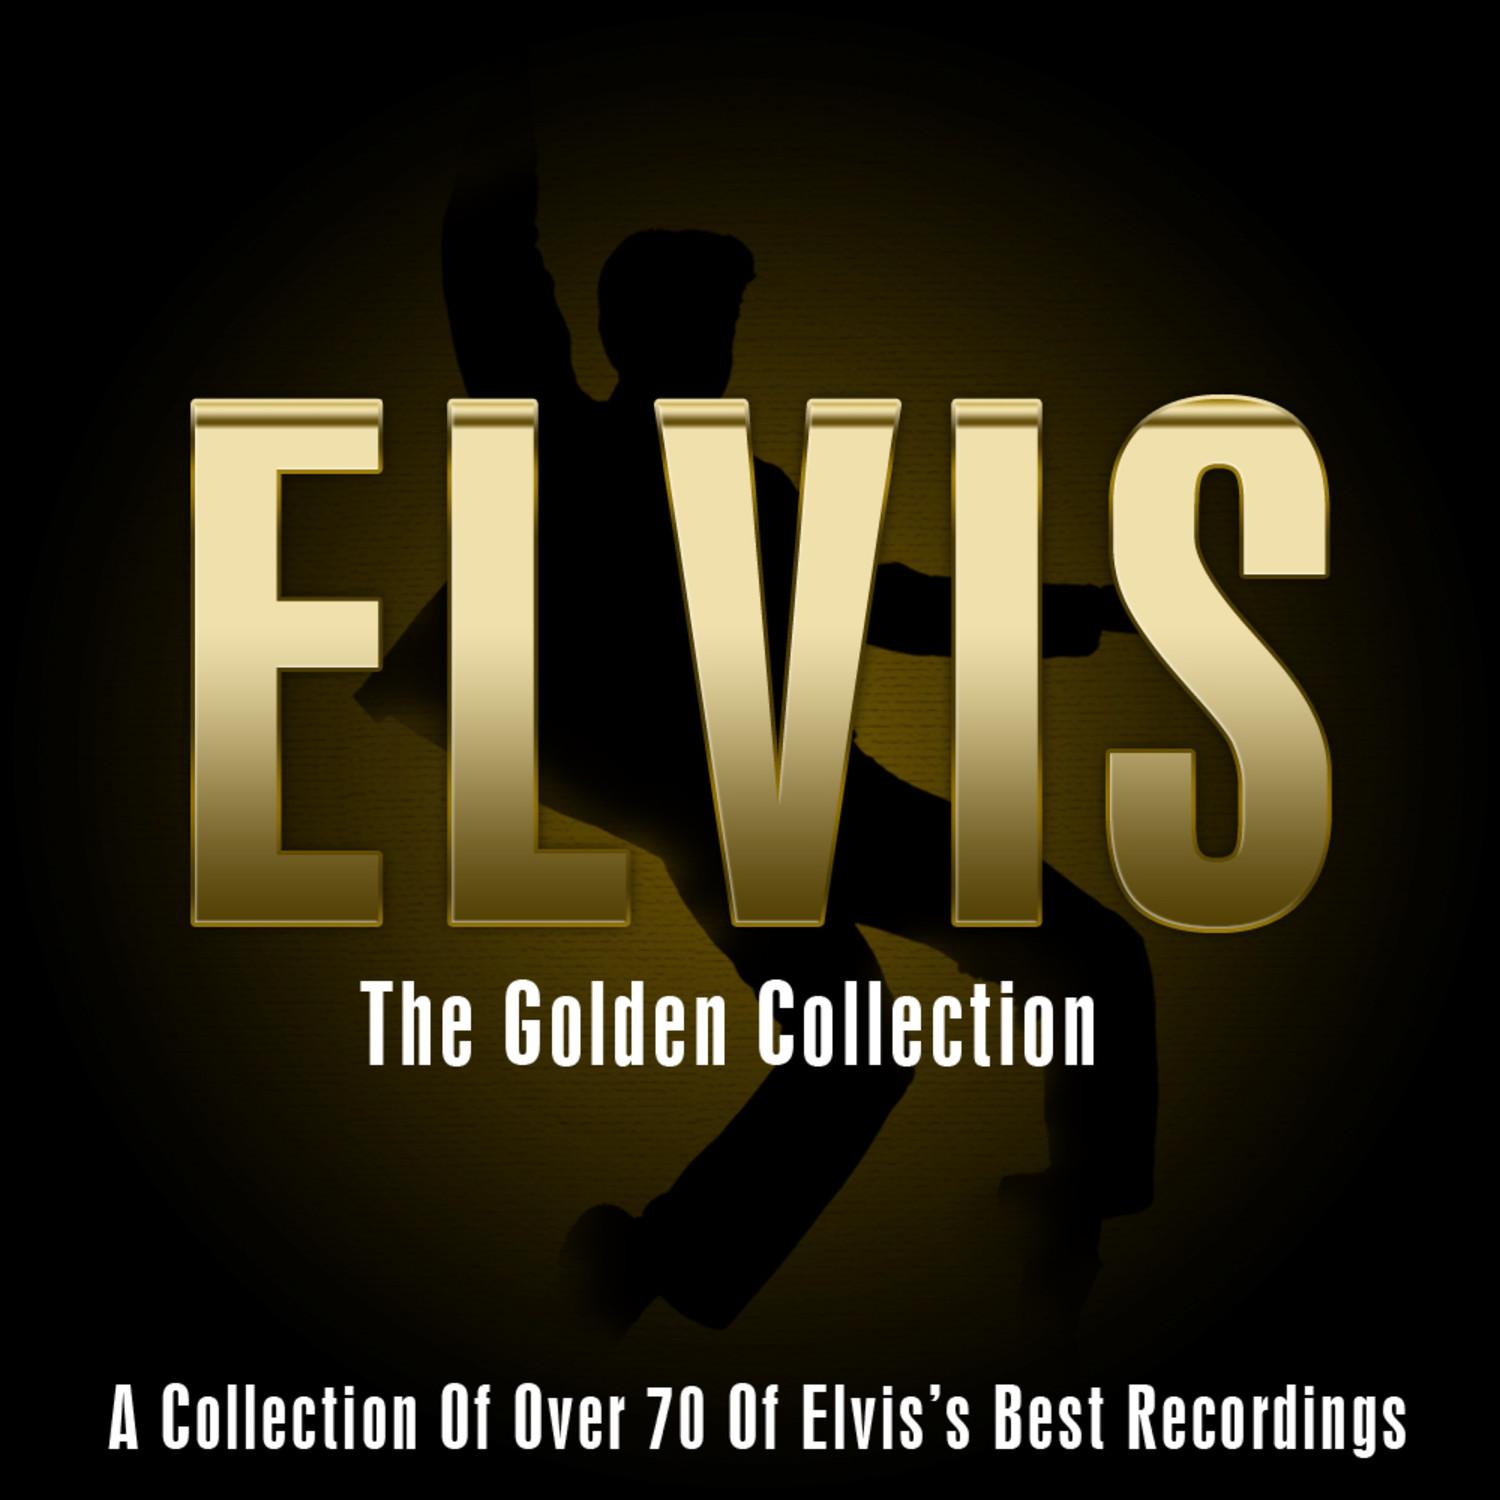 Elvis - The Golden Collection